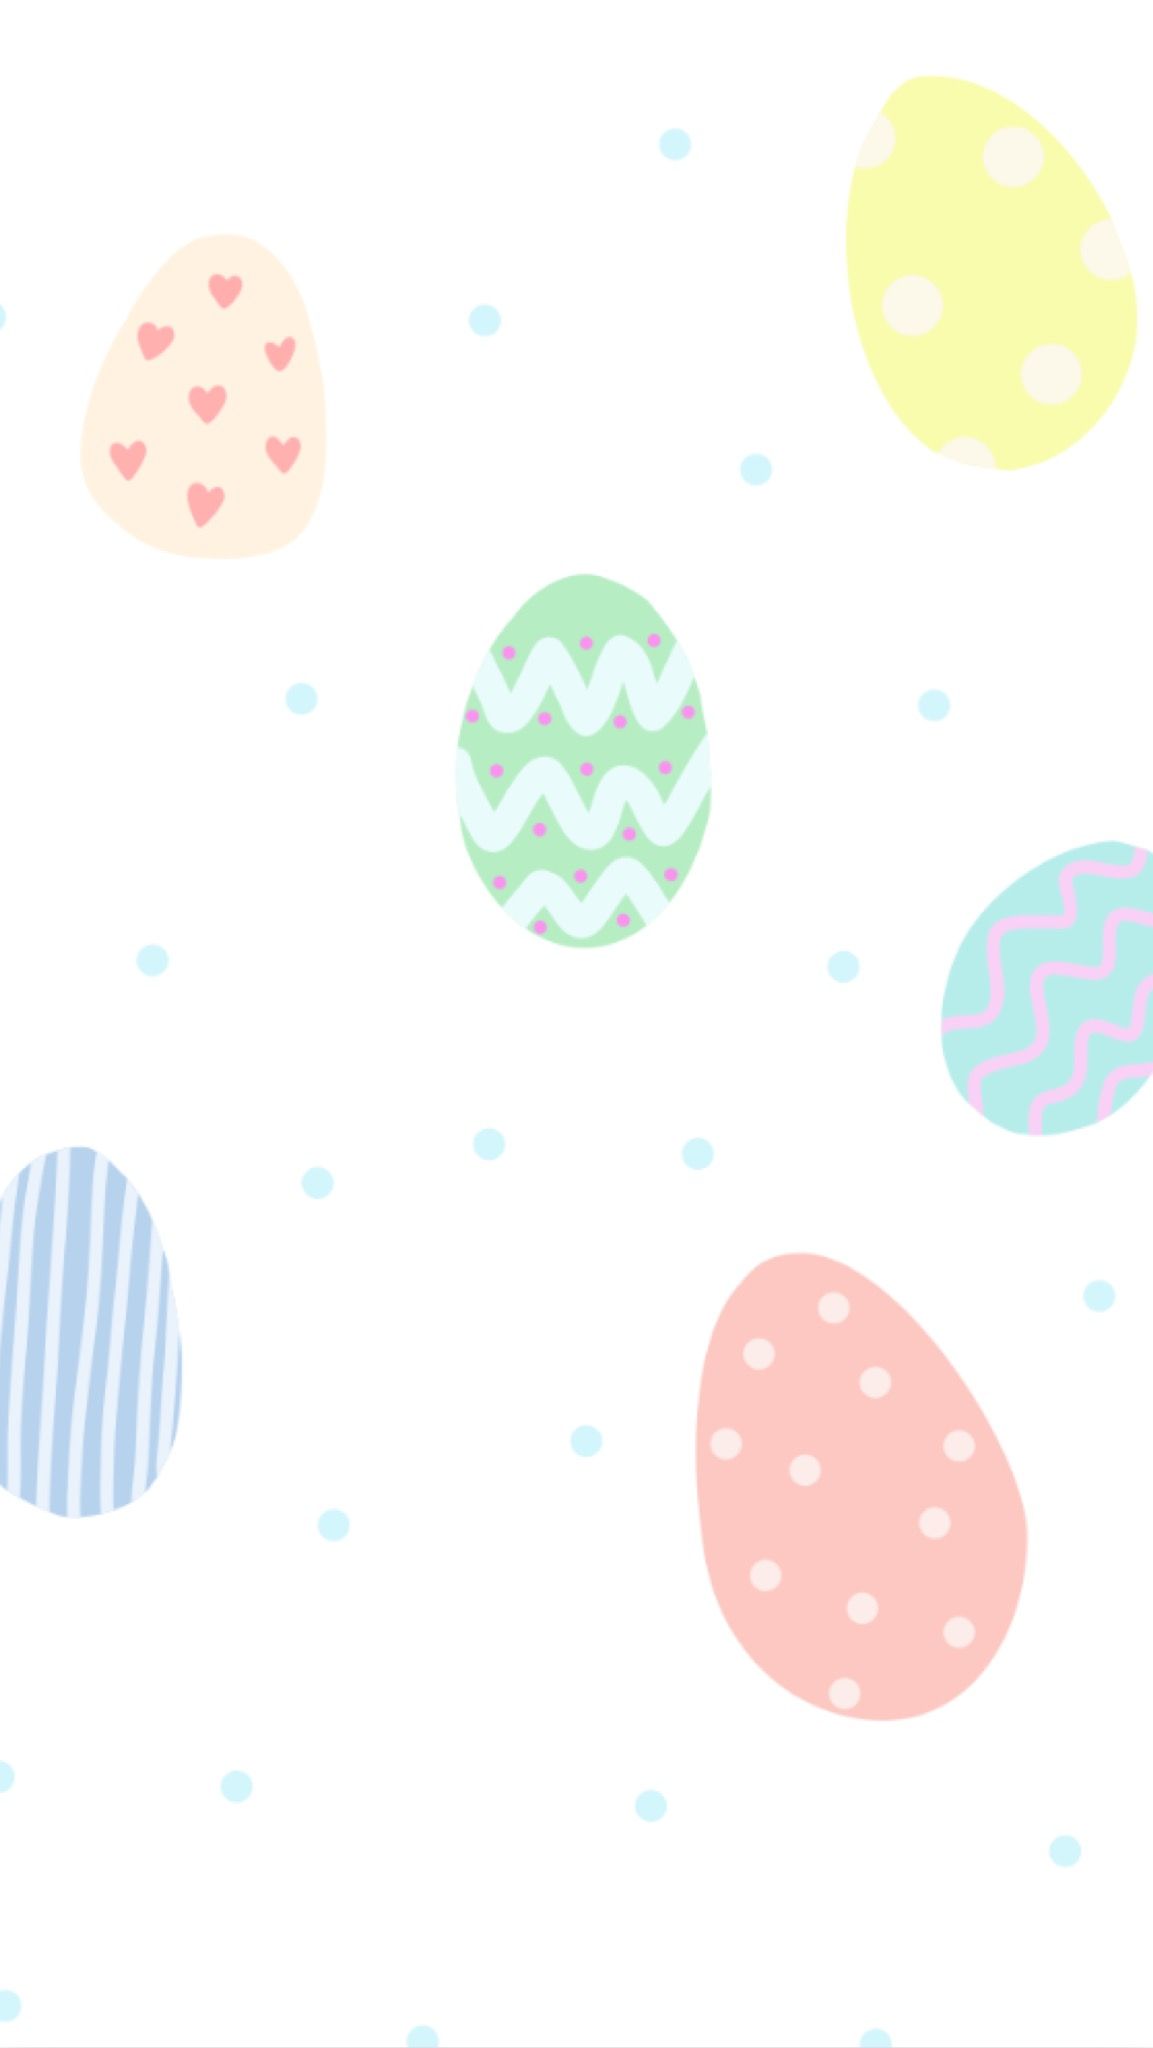 Free Phone Wallpaper} April Easter Eggs and Me. Easter wallpaper, Easter background, Free phone wallpaper